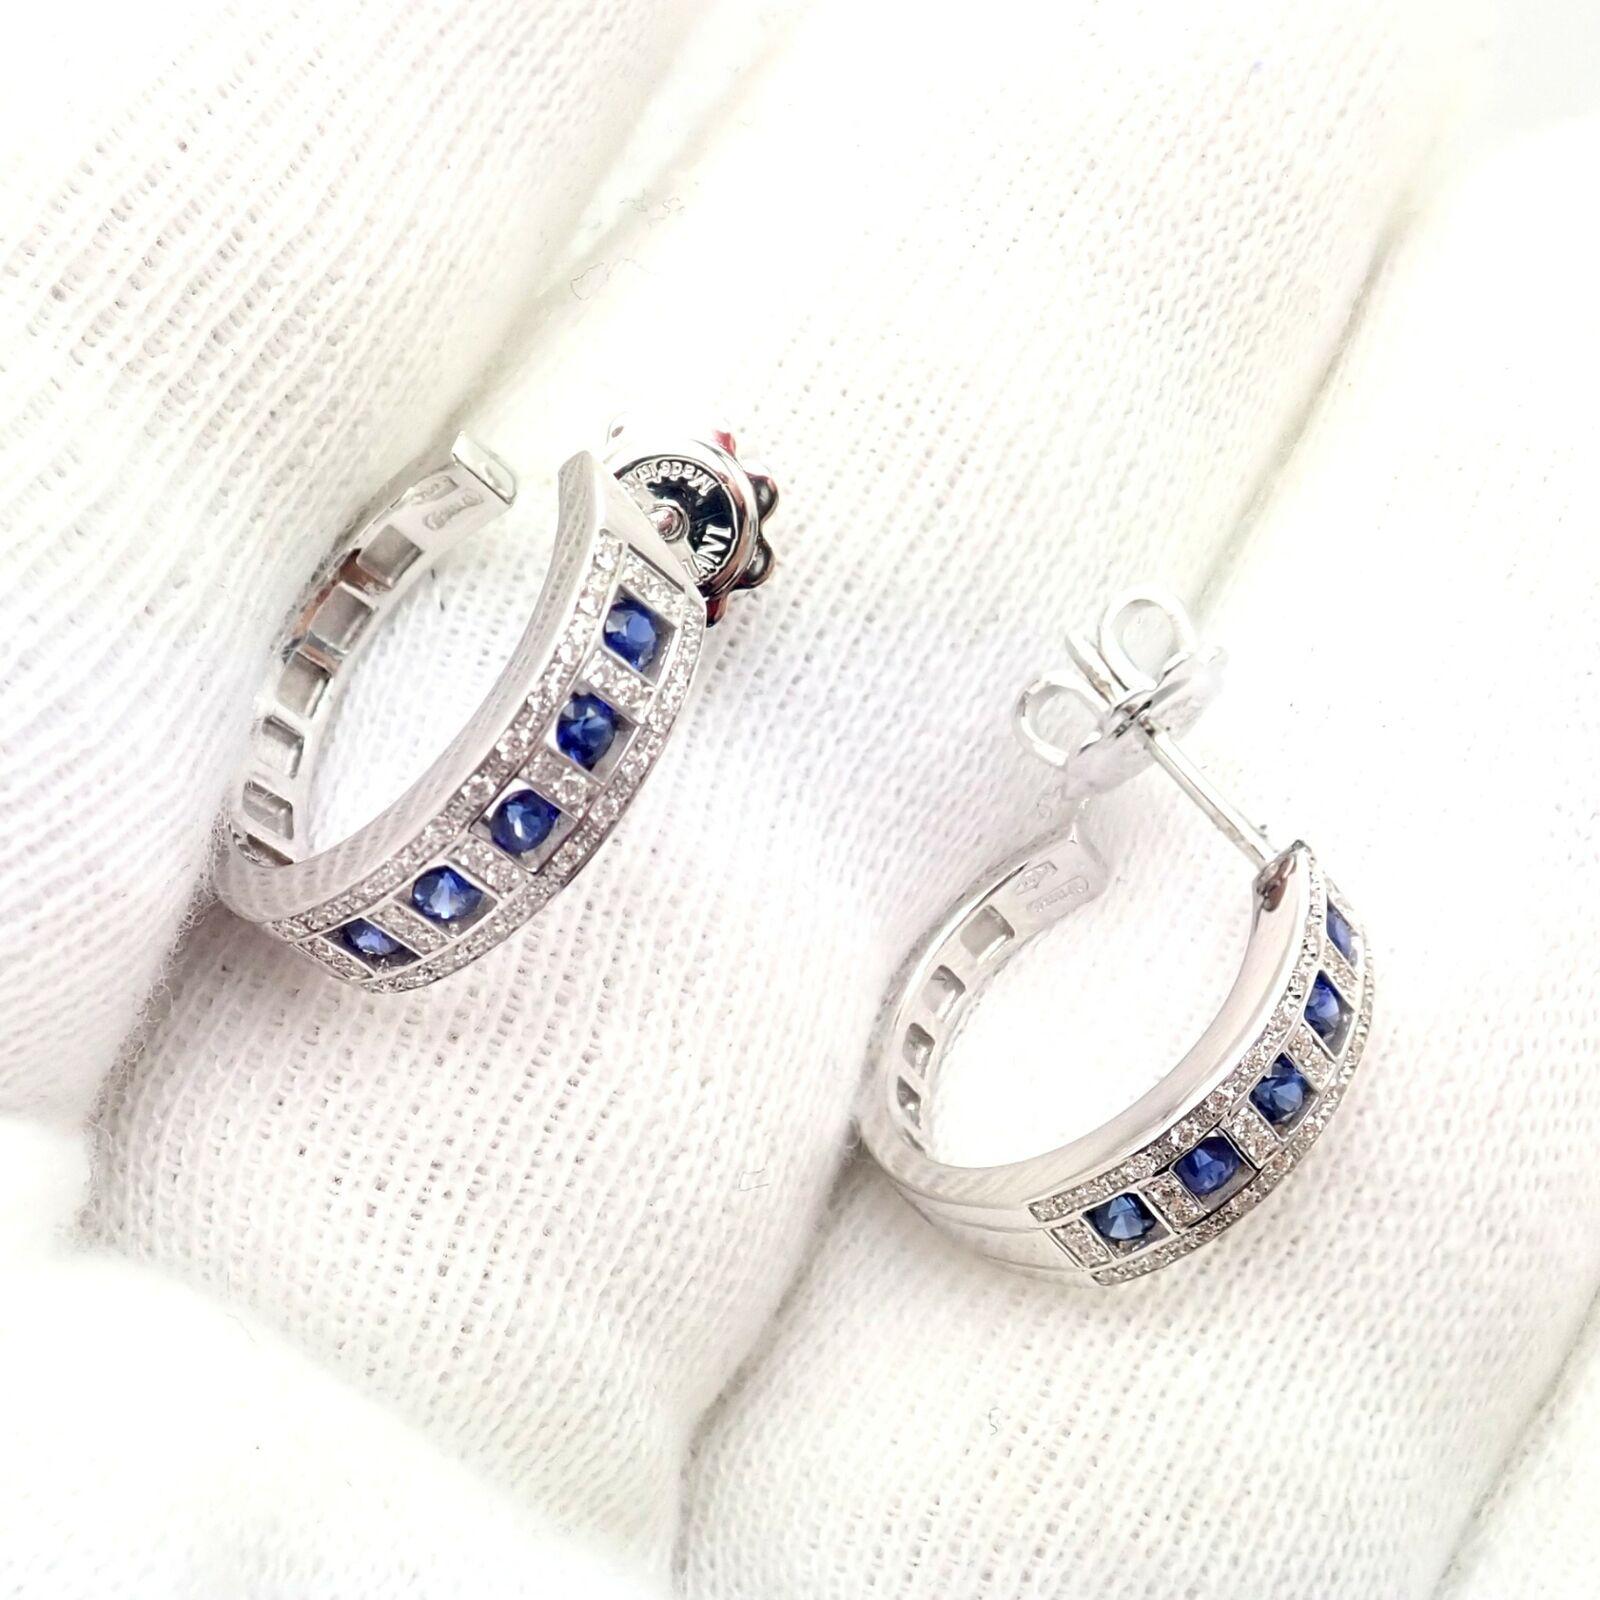 Damiani Belle Epoque Diamond and Sapphire White Gold Hoop Earring For Sale 2